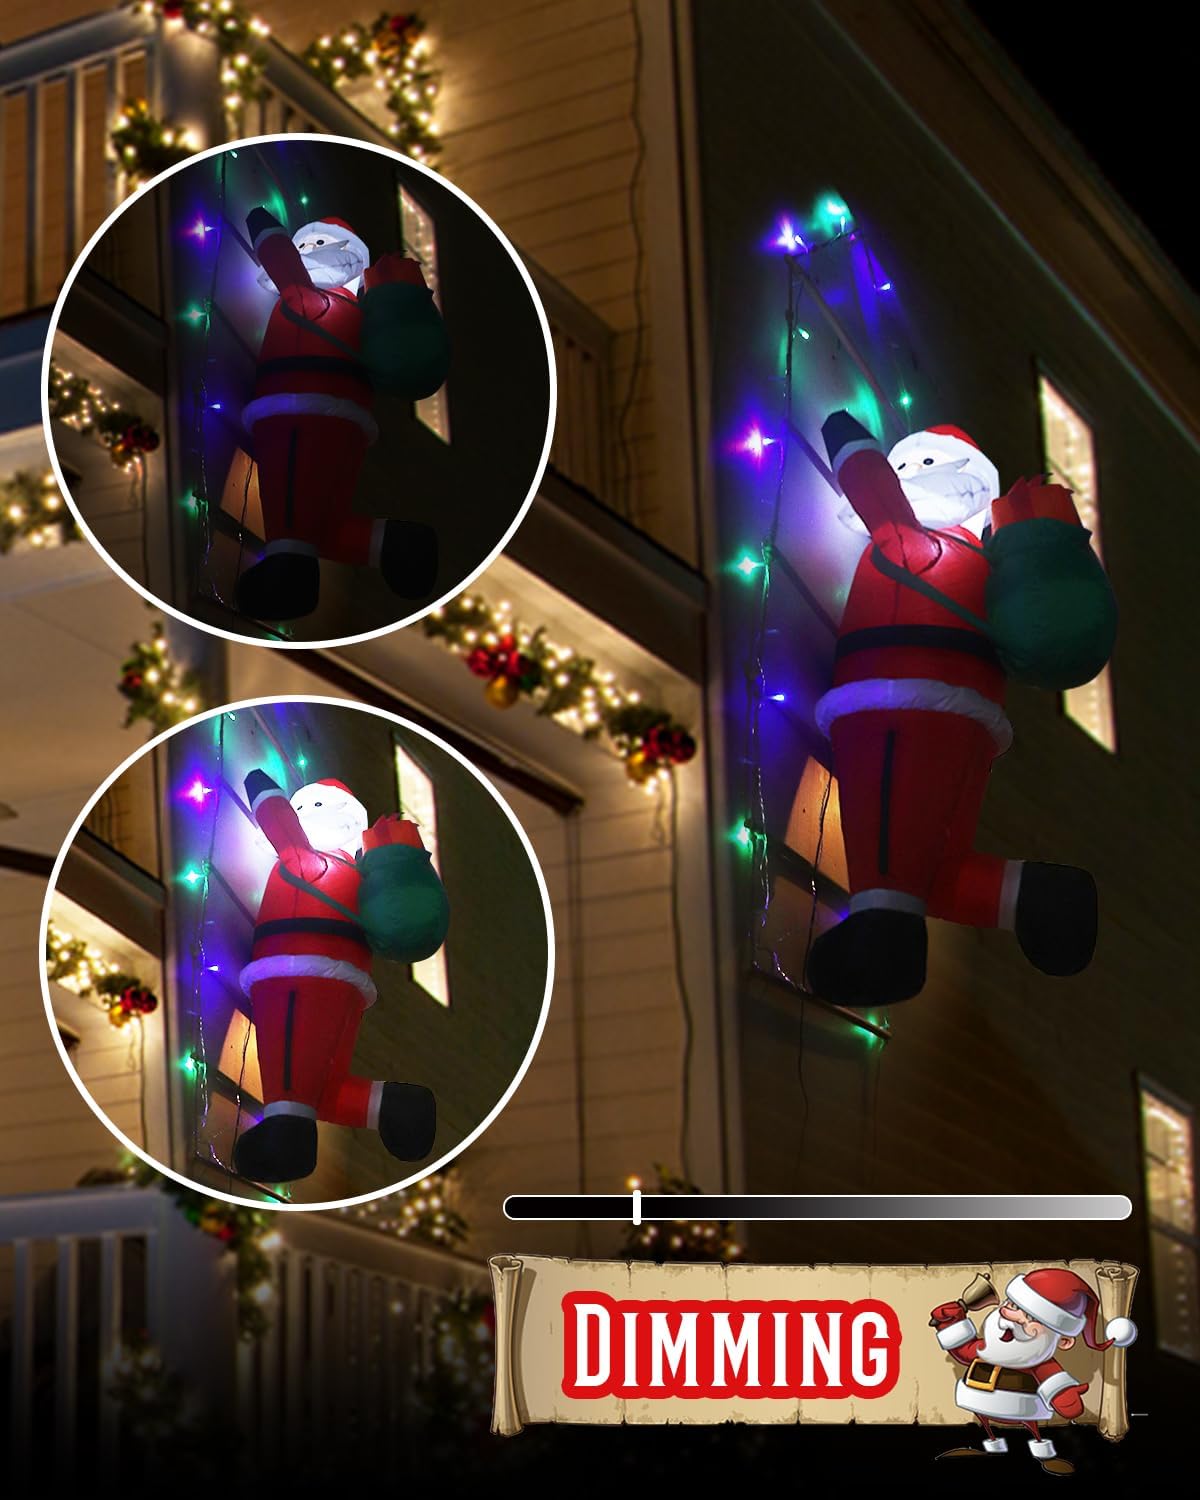 Christmas Decorative Ladder Lights with Santa Claus